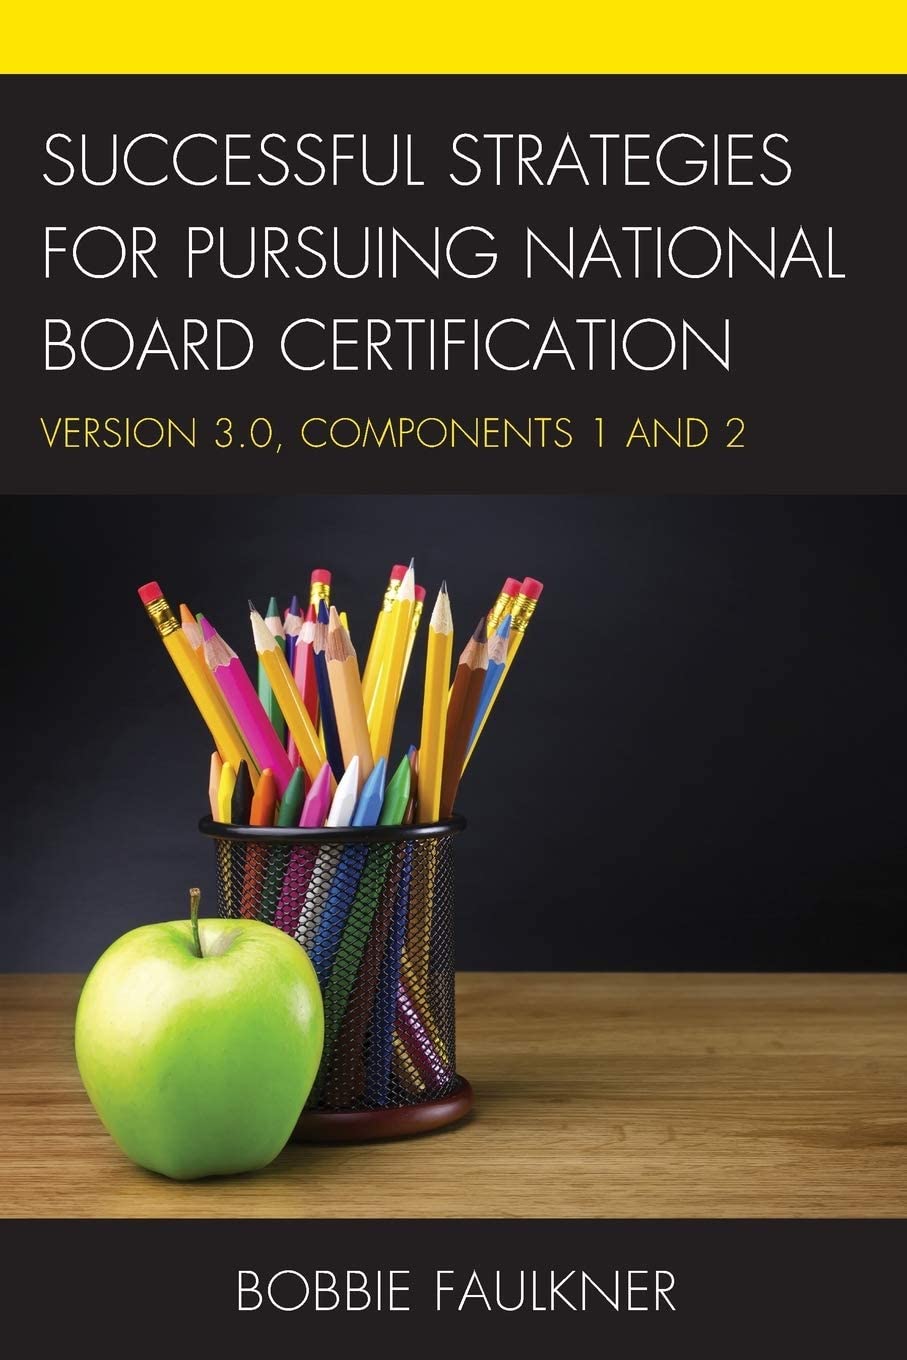 Successful Strategies for Pursuing National Board Certification: Version 3.0, Components 1 and 2 (What Works!)